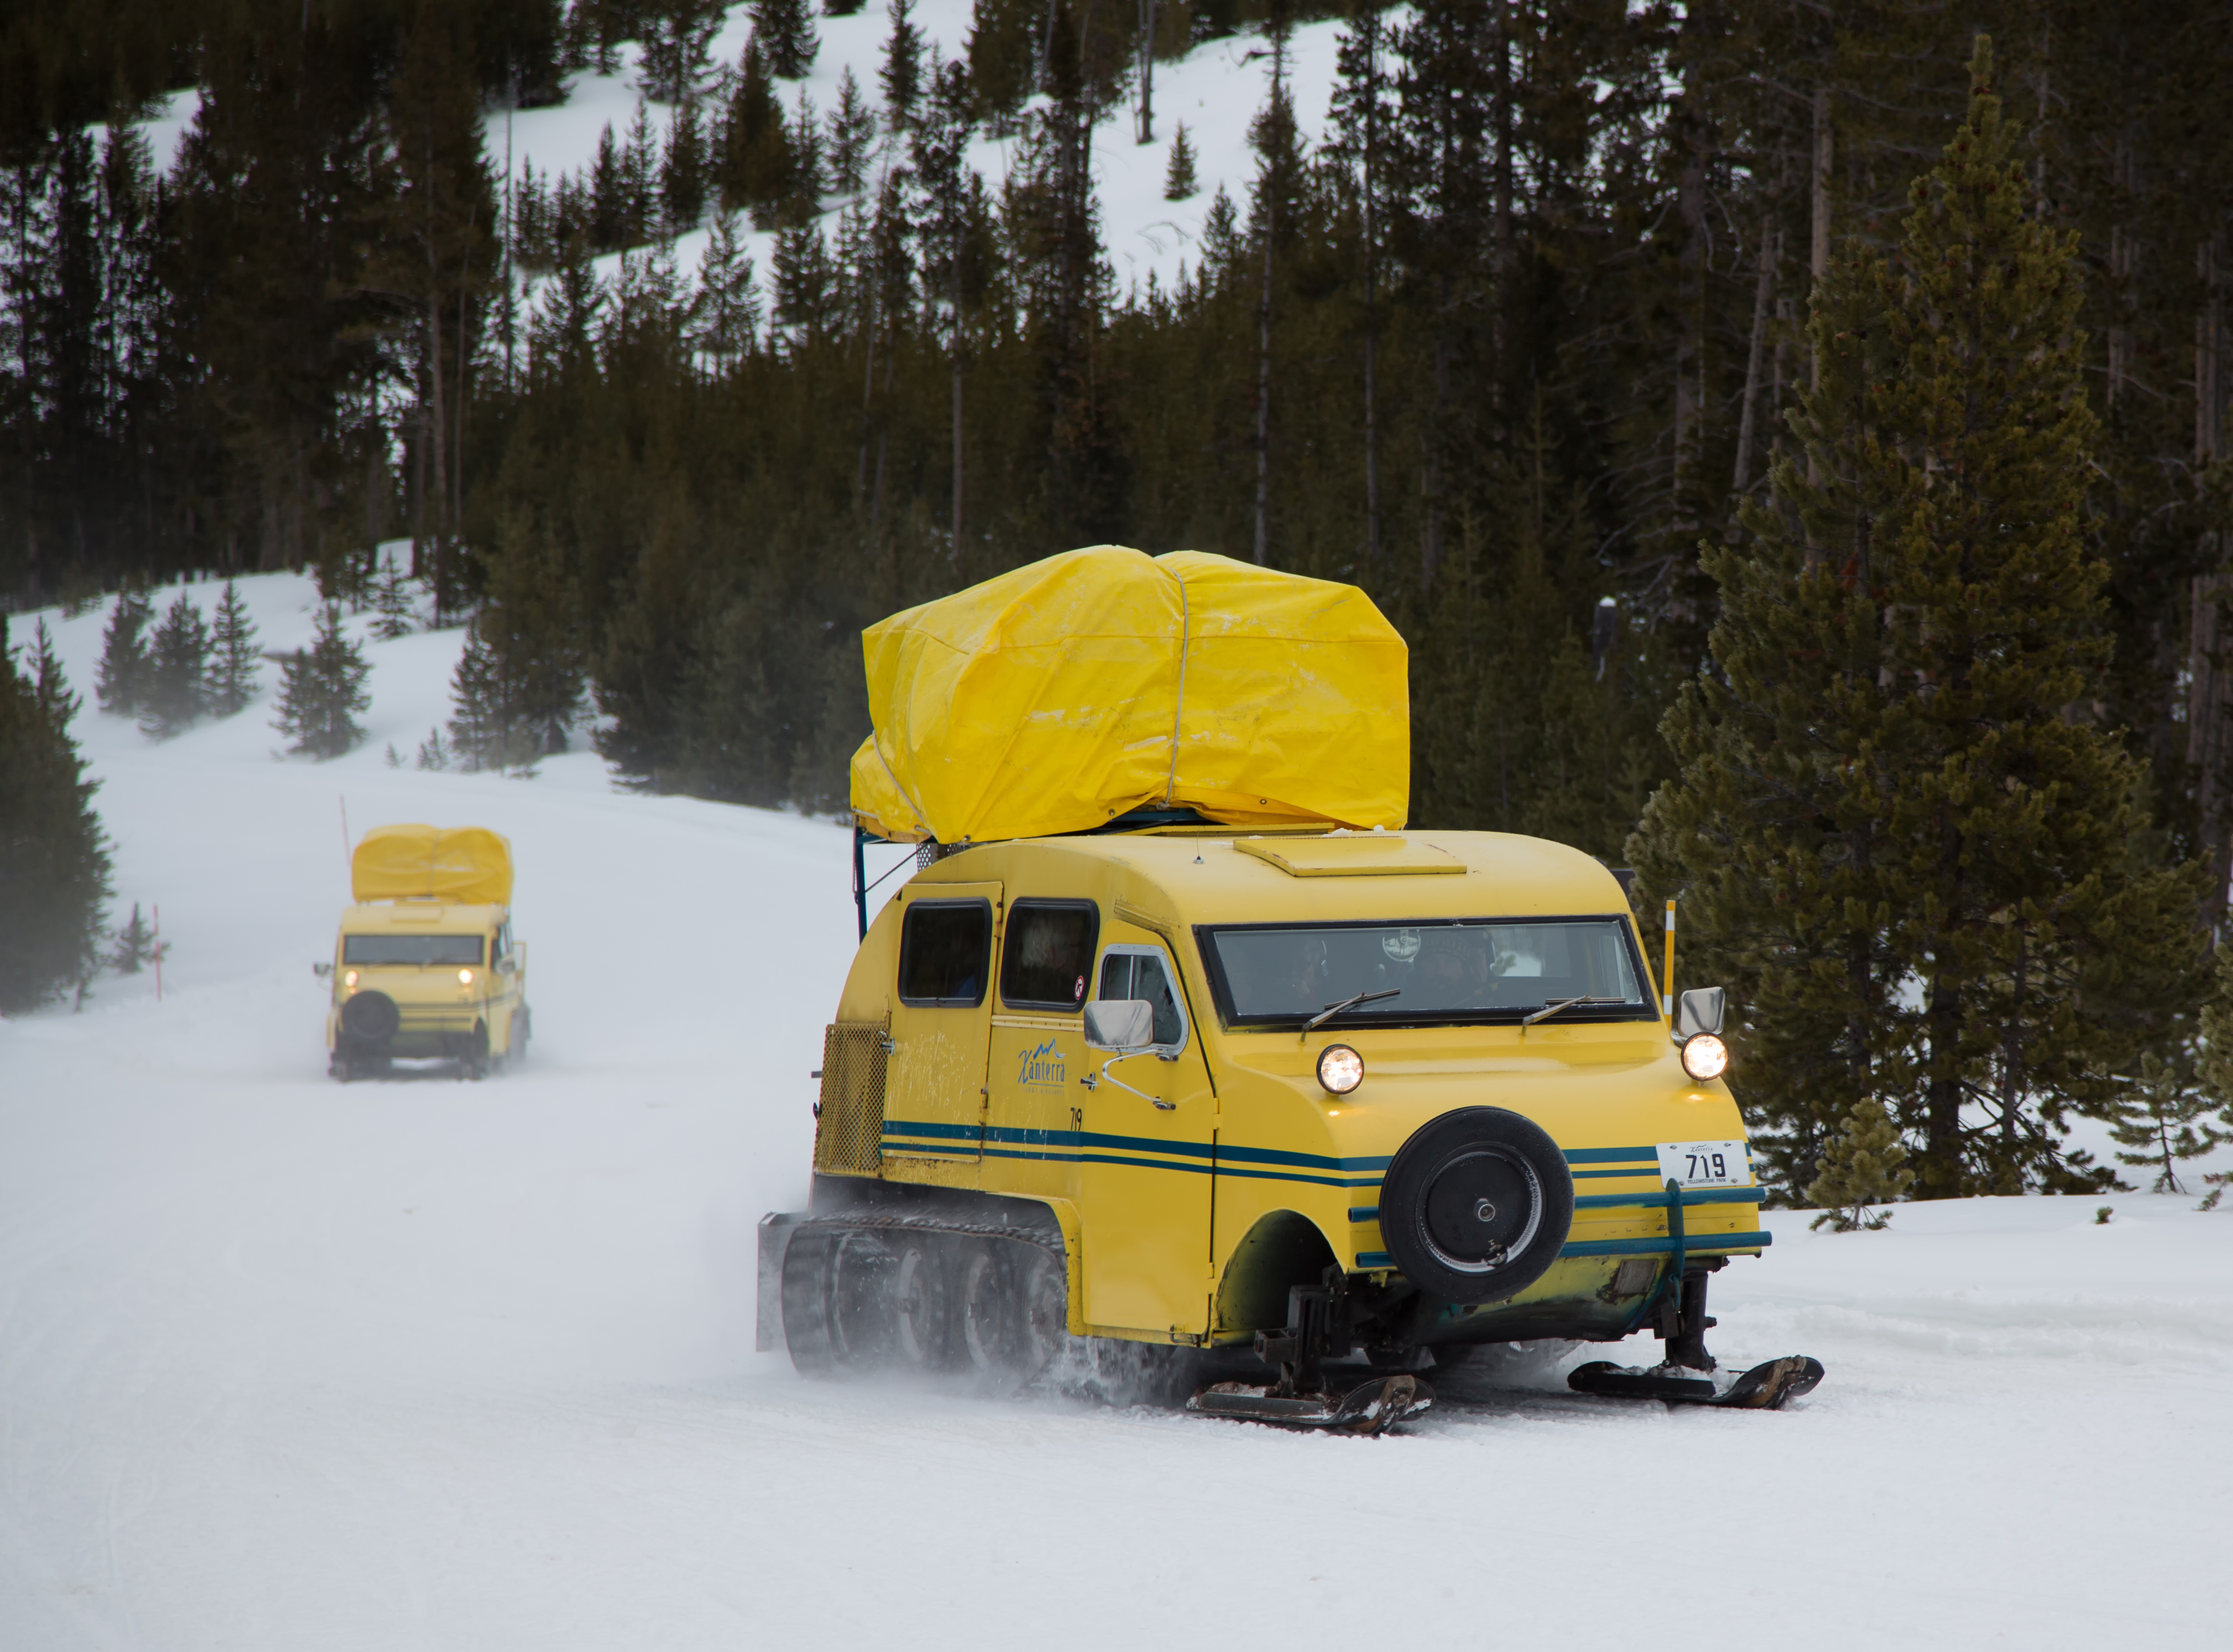 Snow Coaches, Yellowstone National Park, WY